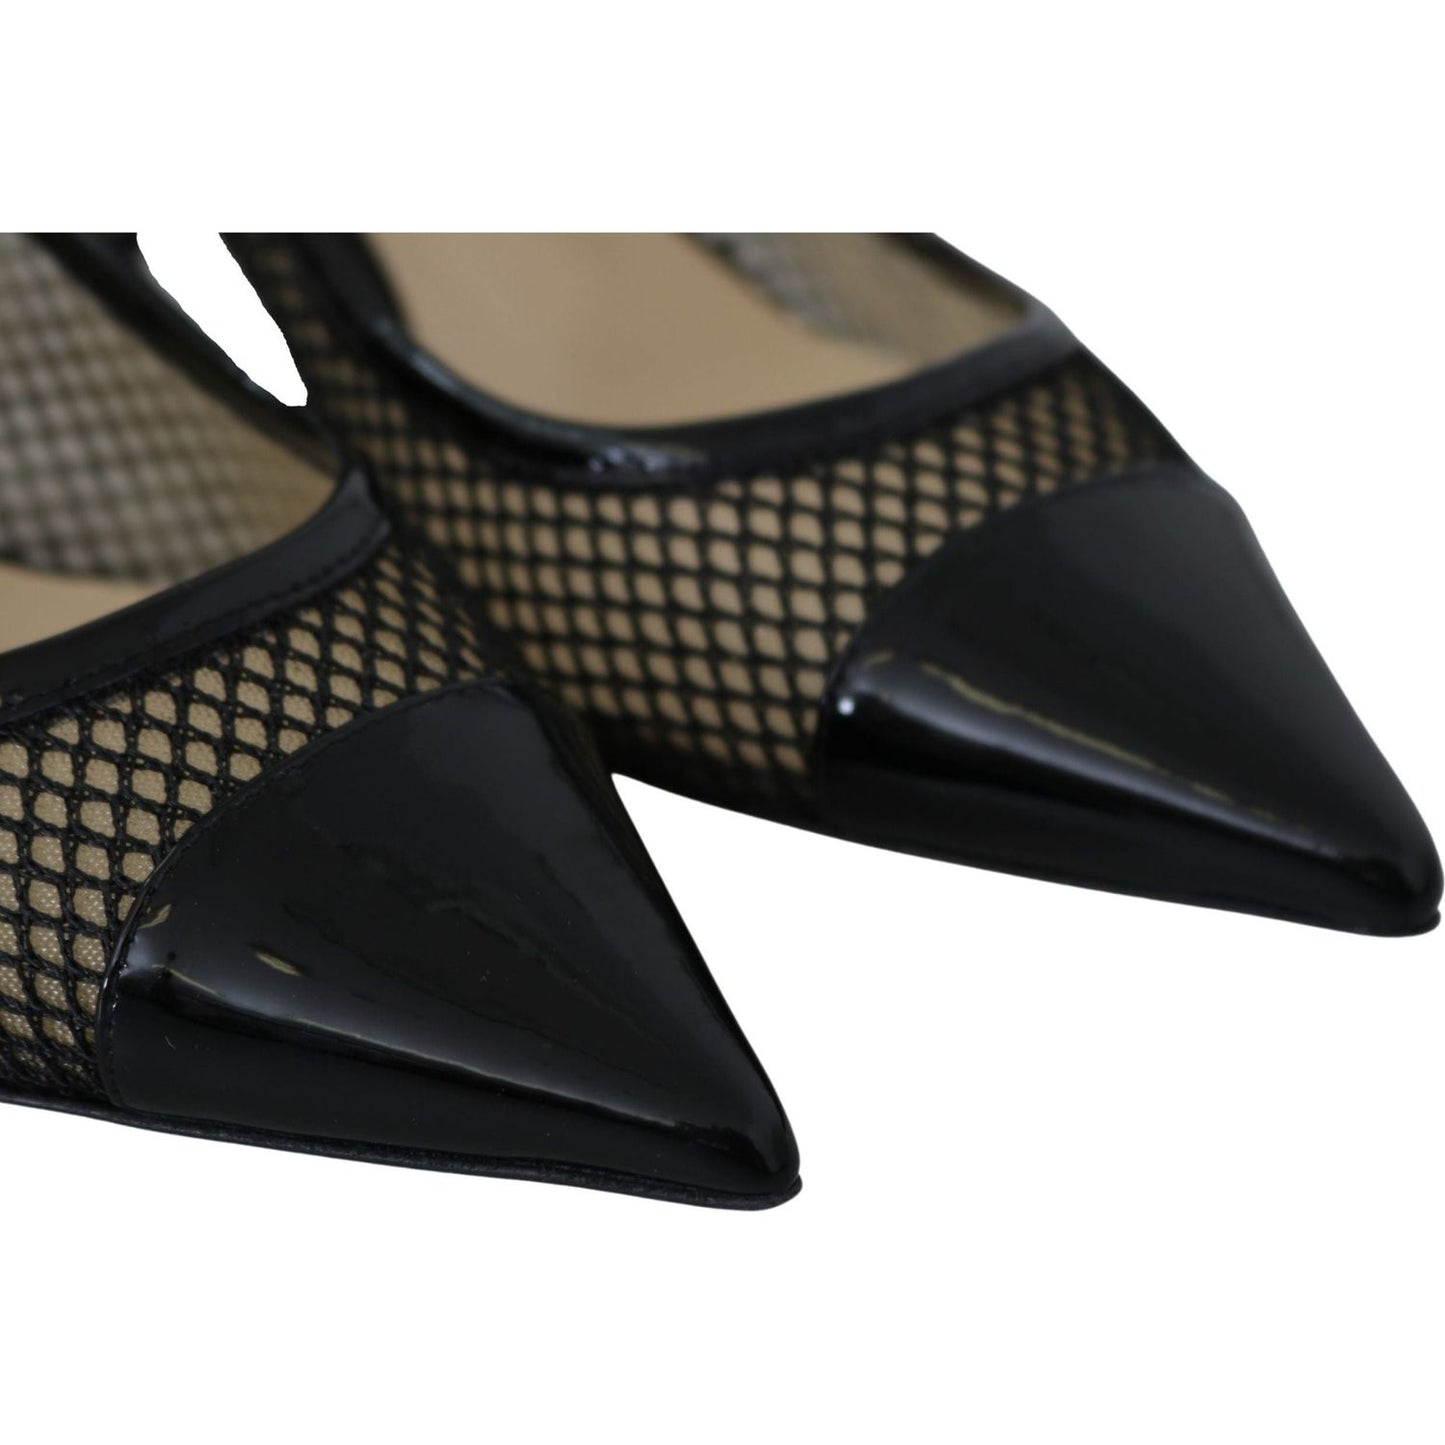 Jimmy Choo Chic Patent Mesh Pointed Pumps black-mesh-and-leather-amika-50-pumps